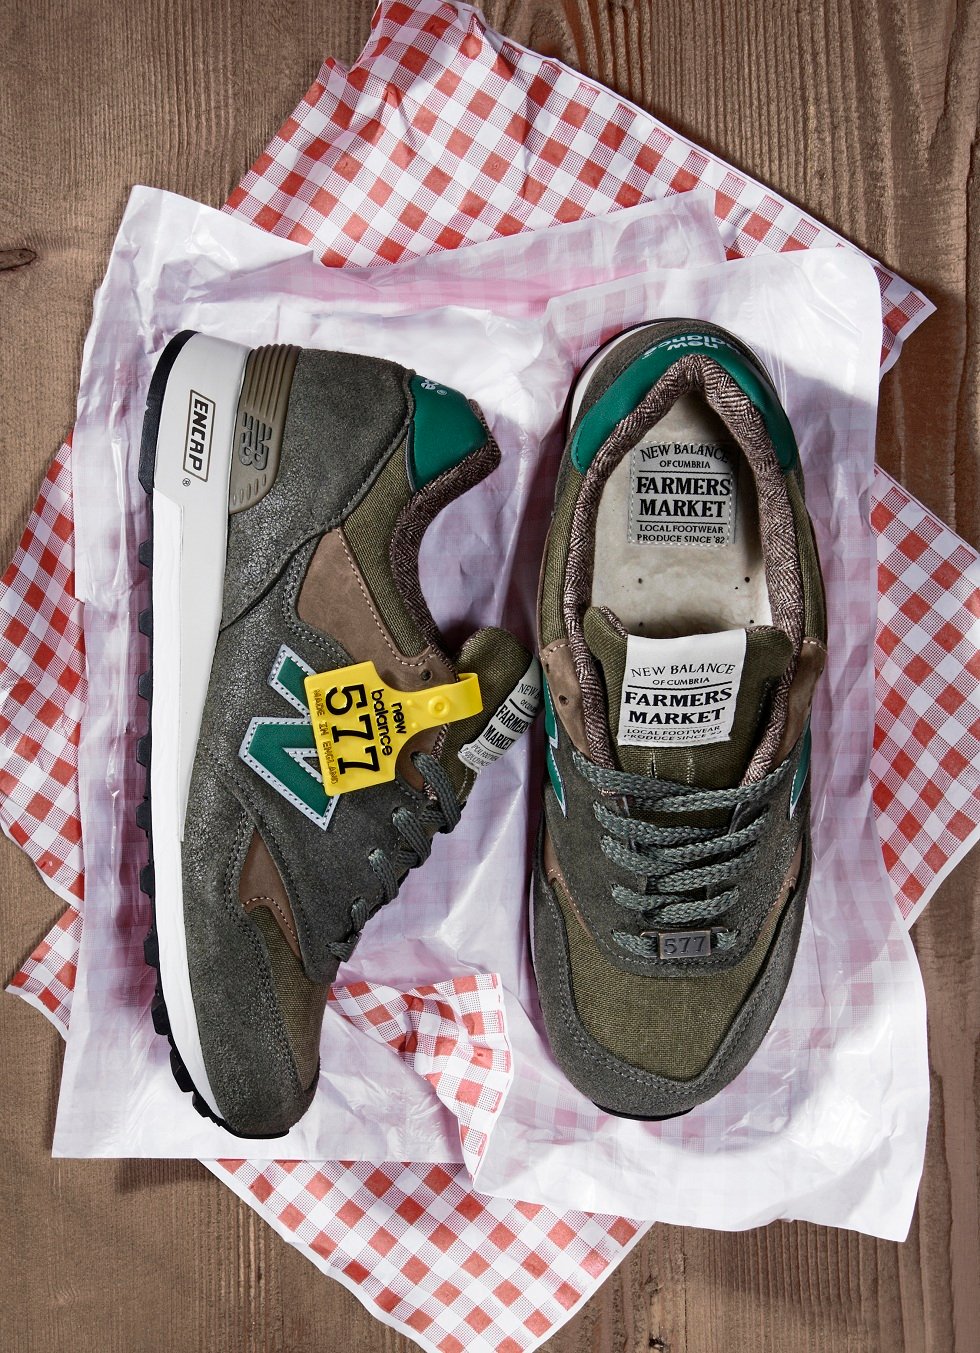 New Balance 577 Farmers Market Pack at size?